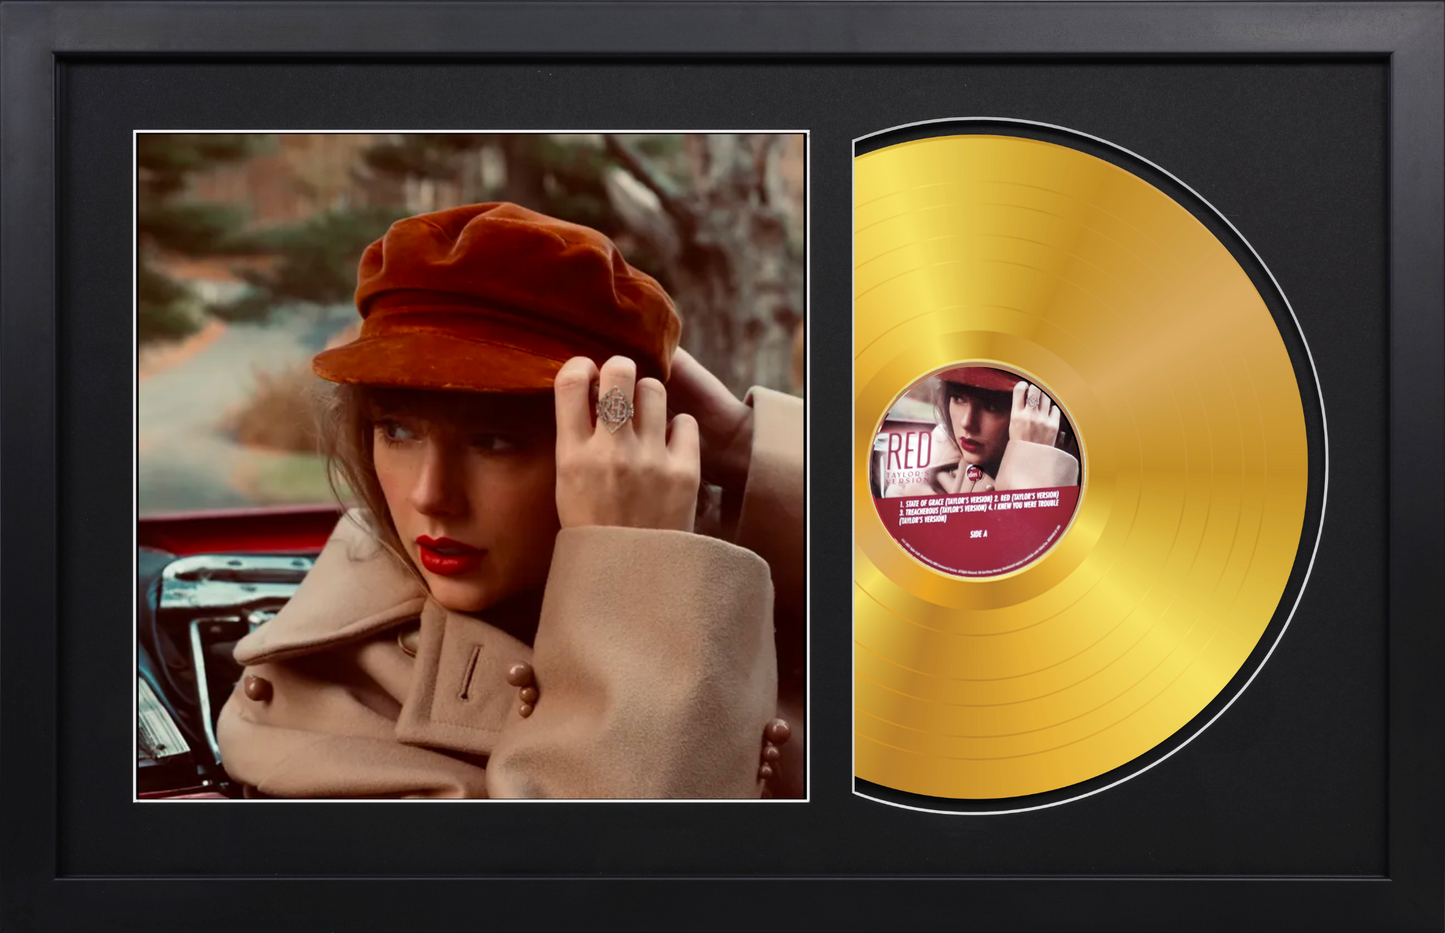 Taylor Swift - Red (Taylor's Version) - 14K Gold Plated, Limited Edition Album